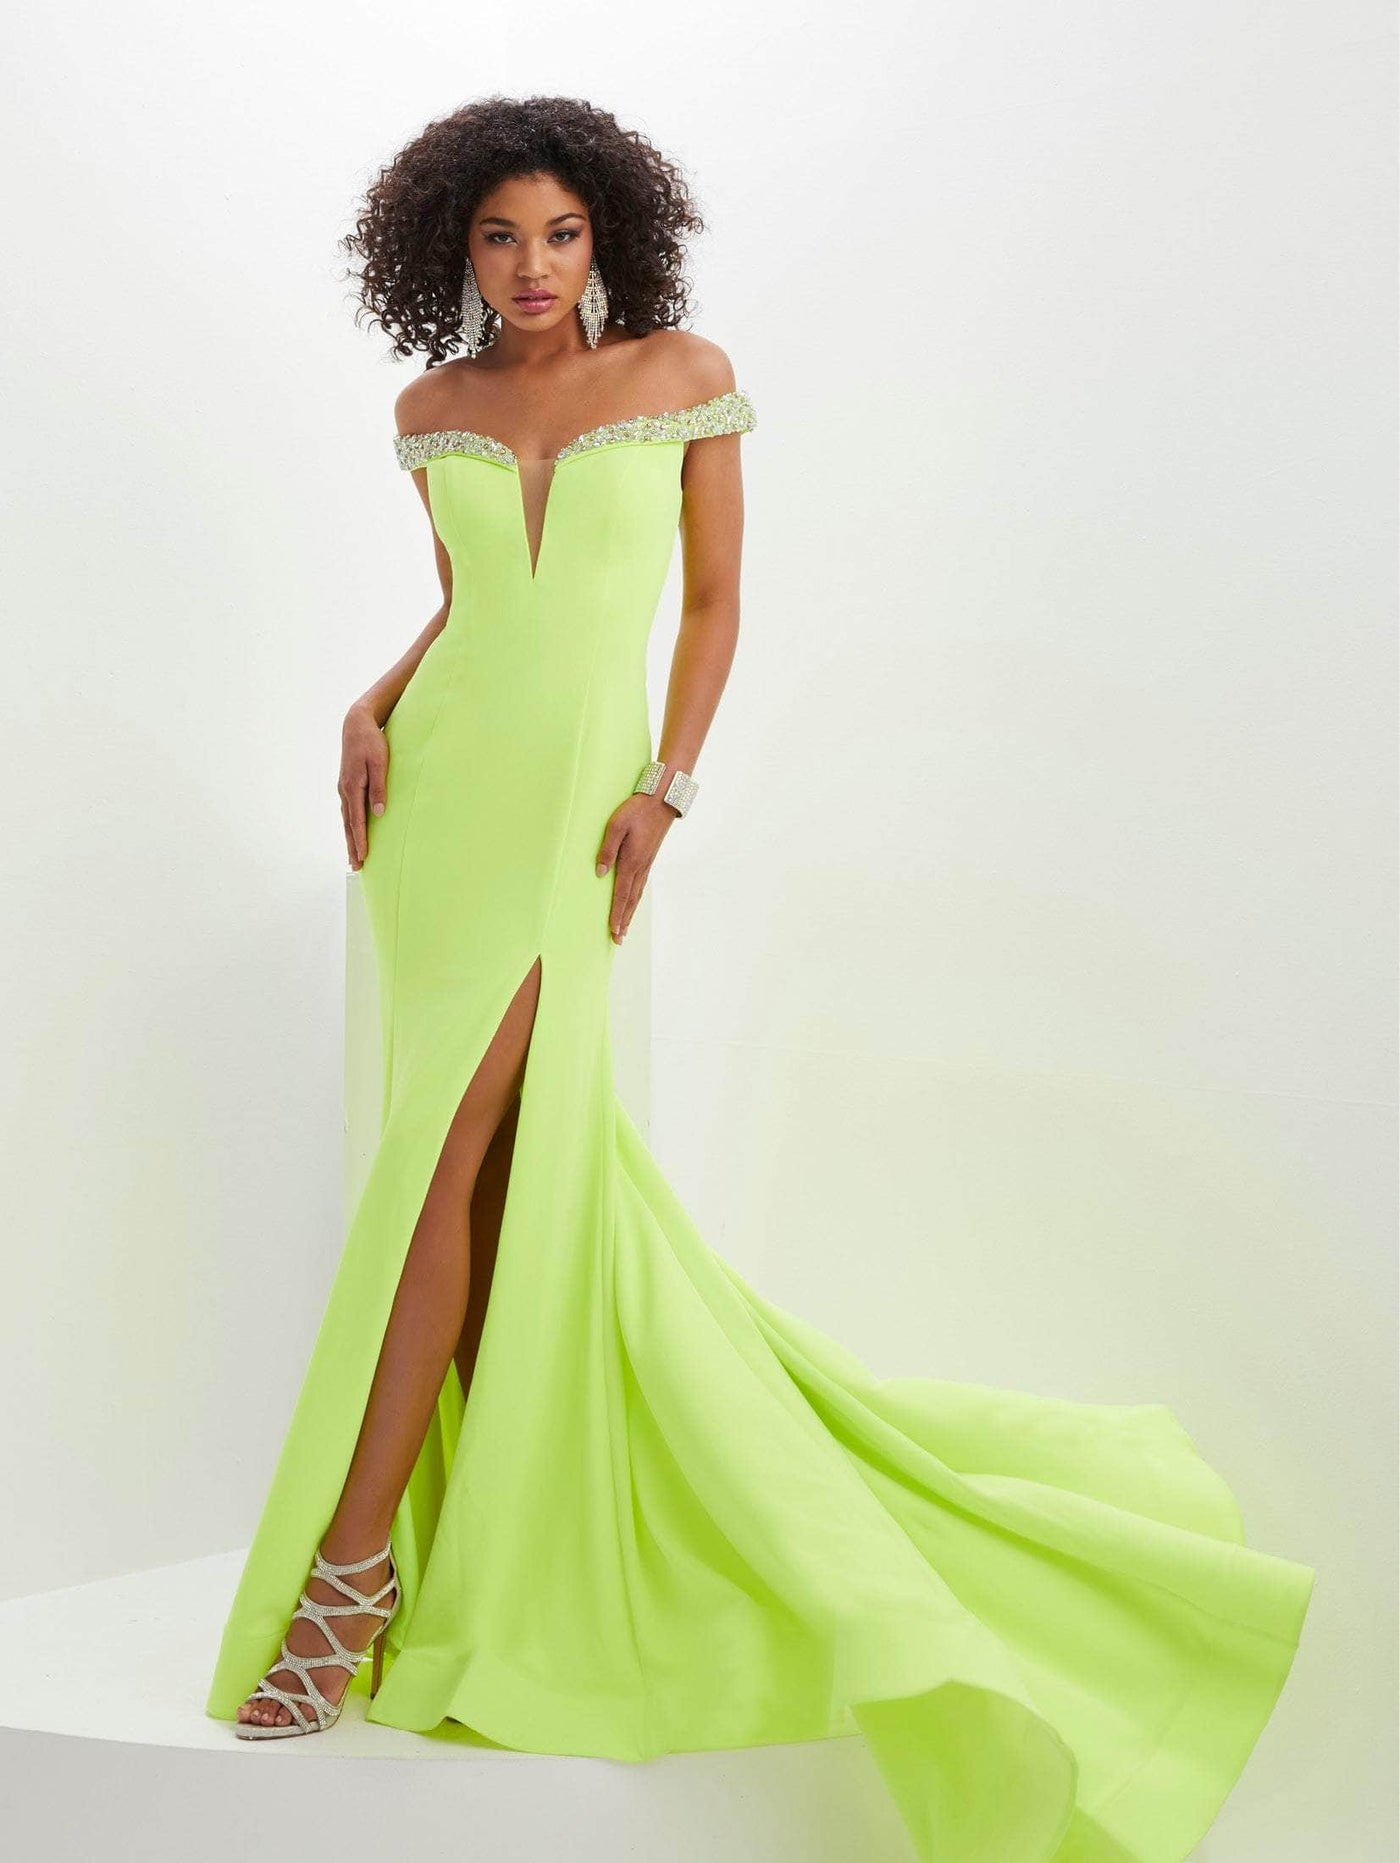 Panoply 14129 - Jeweled Neon Evening Gown Special Occasion Dress